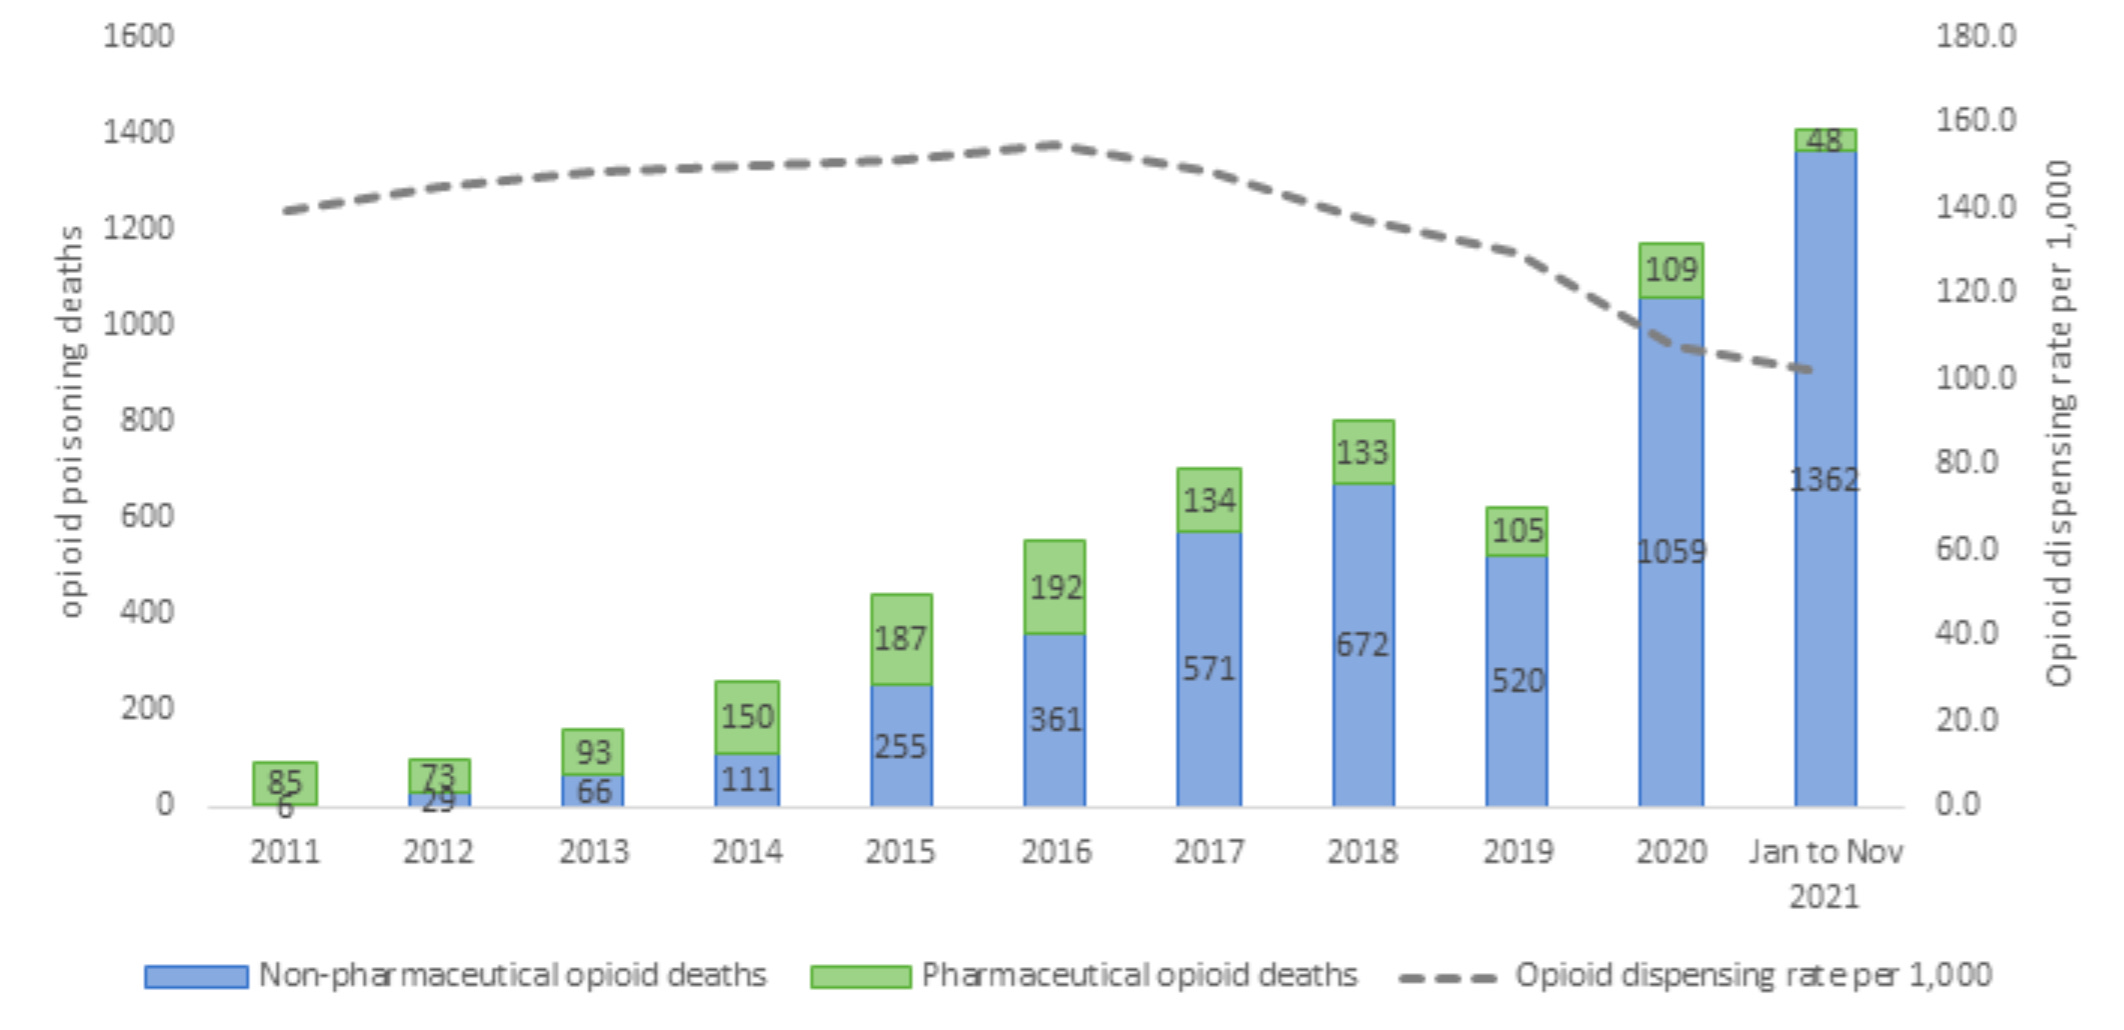 Graph showing how deprescribing of opioids in Alberta has coincide with the rise of non-pharmaceutical opioid deaths since about 2017. Pharmaceutical opioid deaths have remained stable or decreased slightly over this period